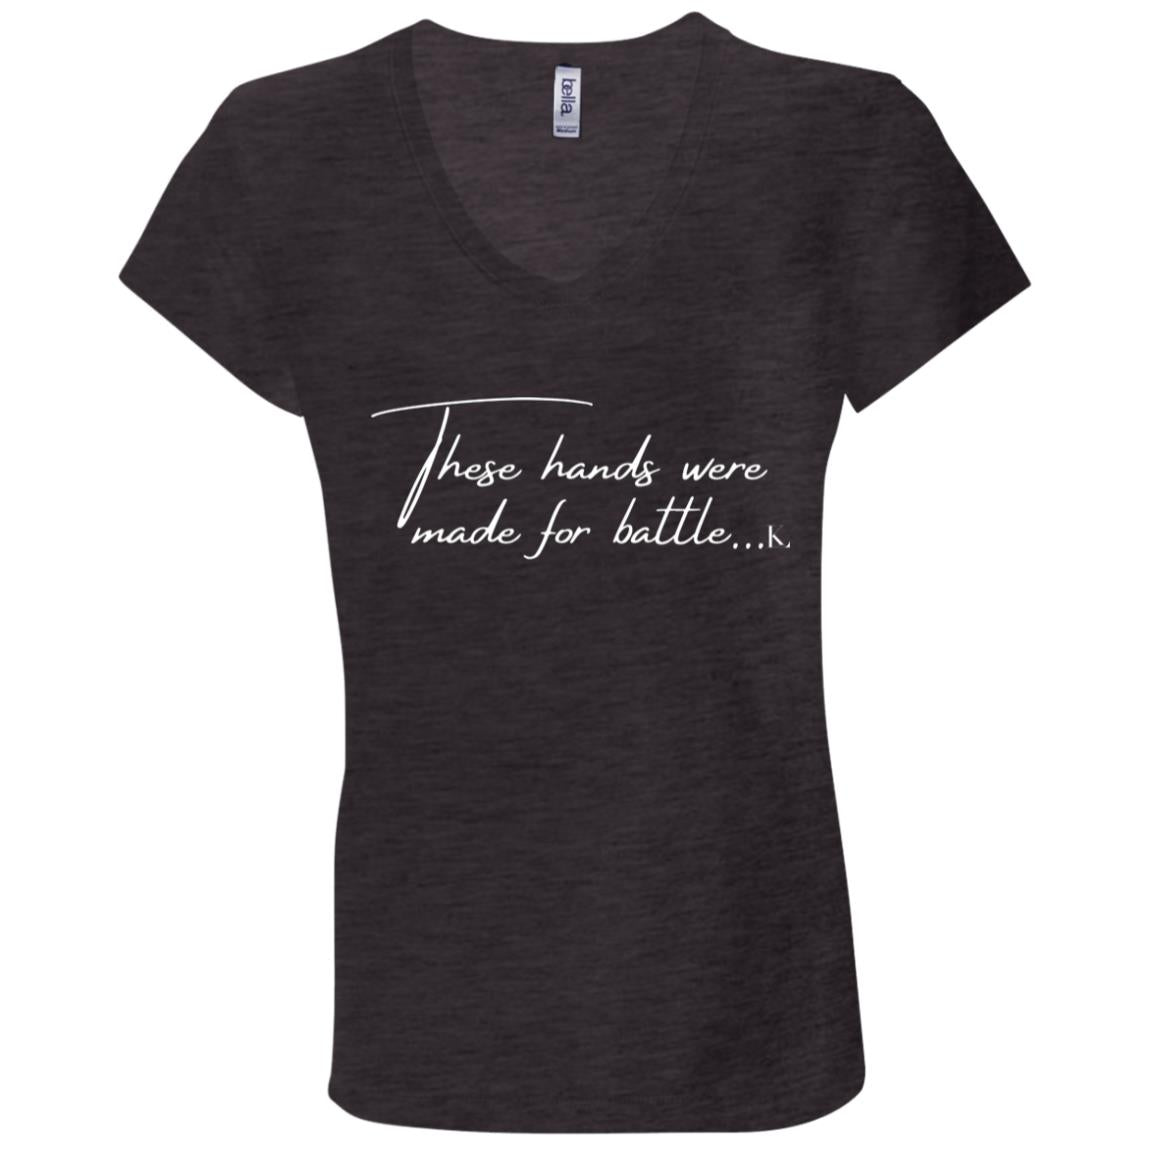 THESE HANDS WERE MADE FOR BATTLE Women's V-Neck T-Shirt